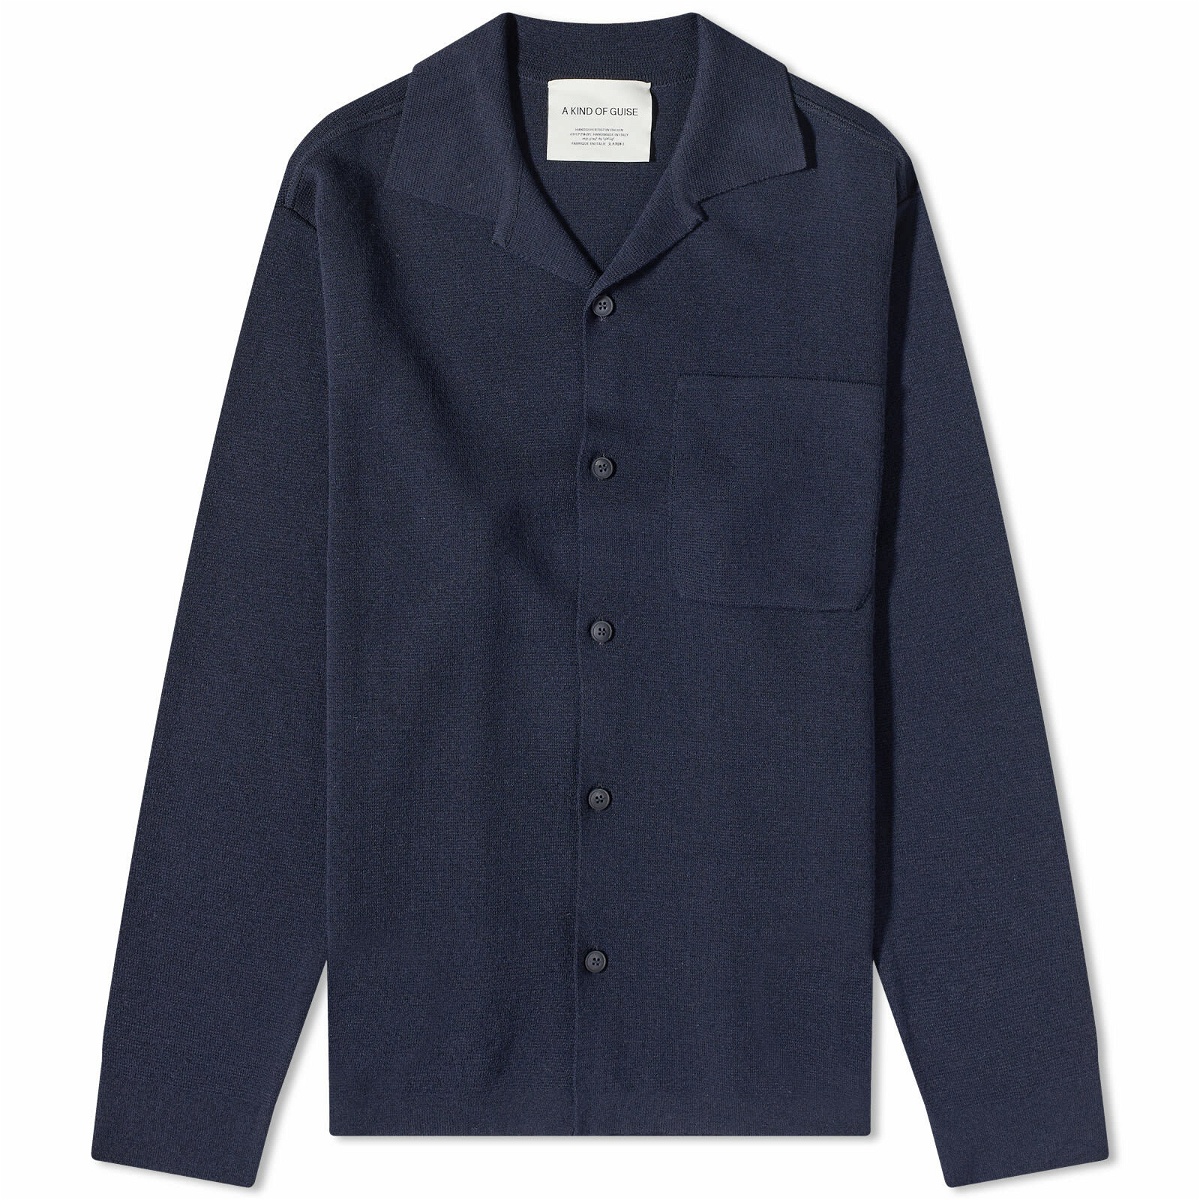 Photo: A Kind of Guise Men's Kinan Knit Shirt in Midnight Navy